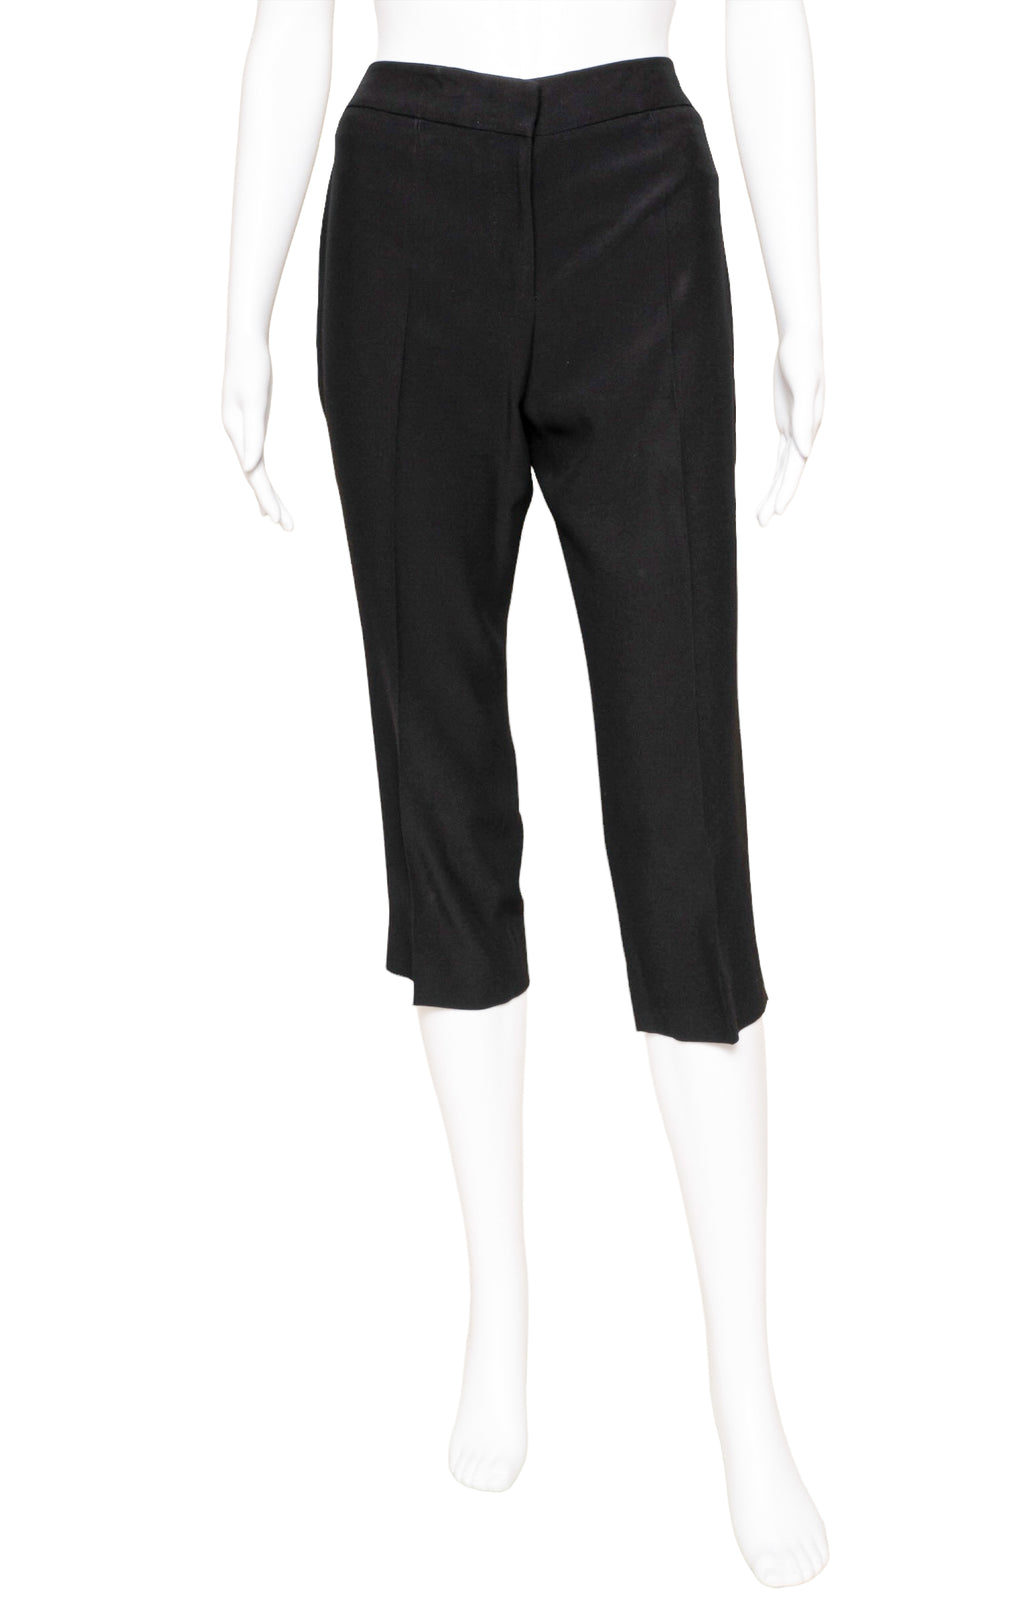 ALEXANDER MCQUEEN Pants Size: IT 40 / Comparable to US 2-4